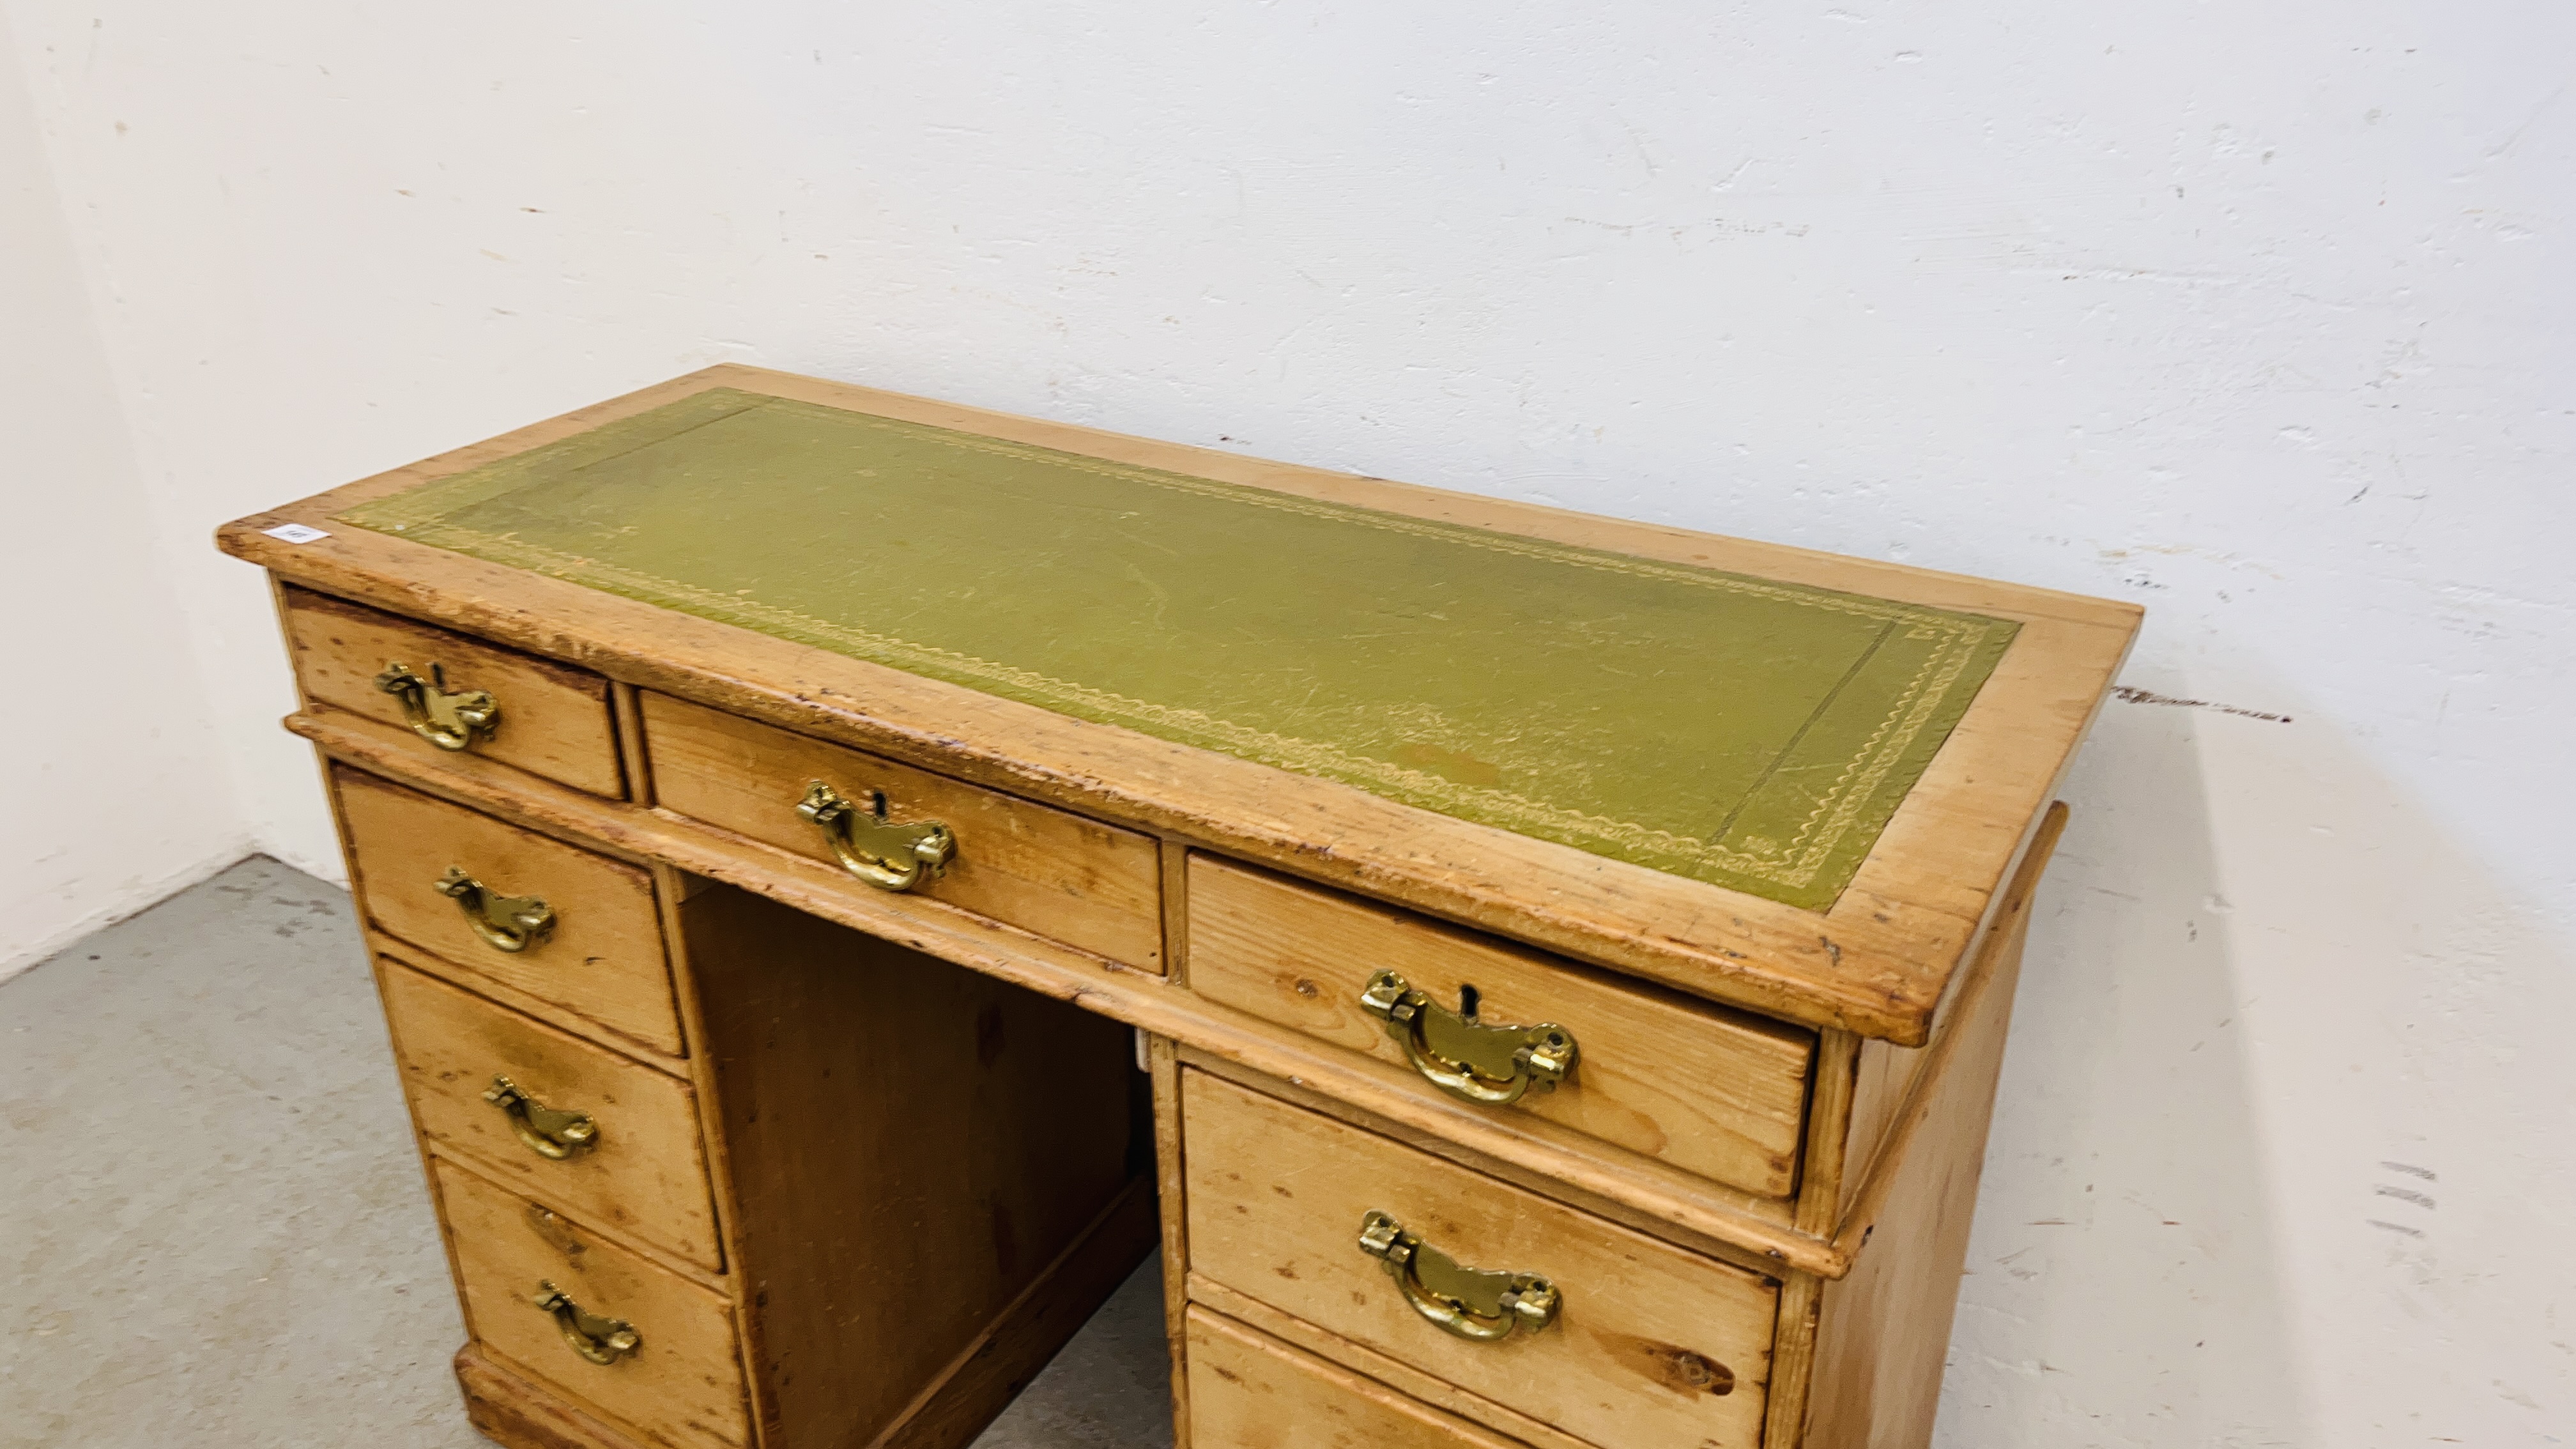 AN ANTIQUE WAXED PINE NINE DRAWER KNEEHOLE DESK WITH TOOLED LEATHER INSET TOP. - Image 3 of 11